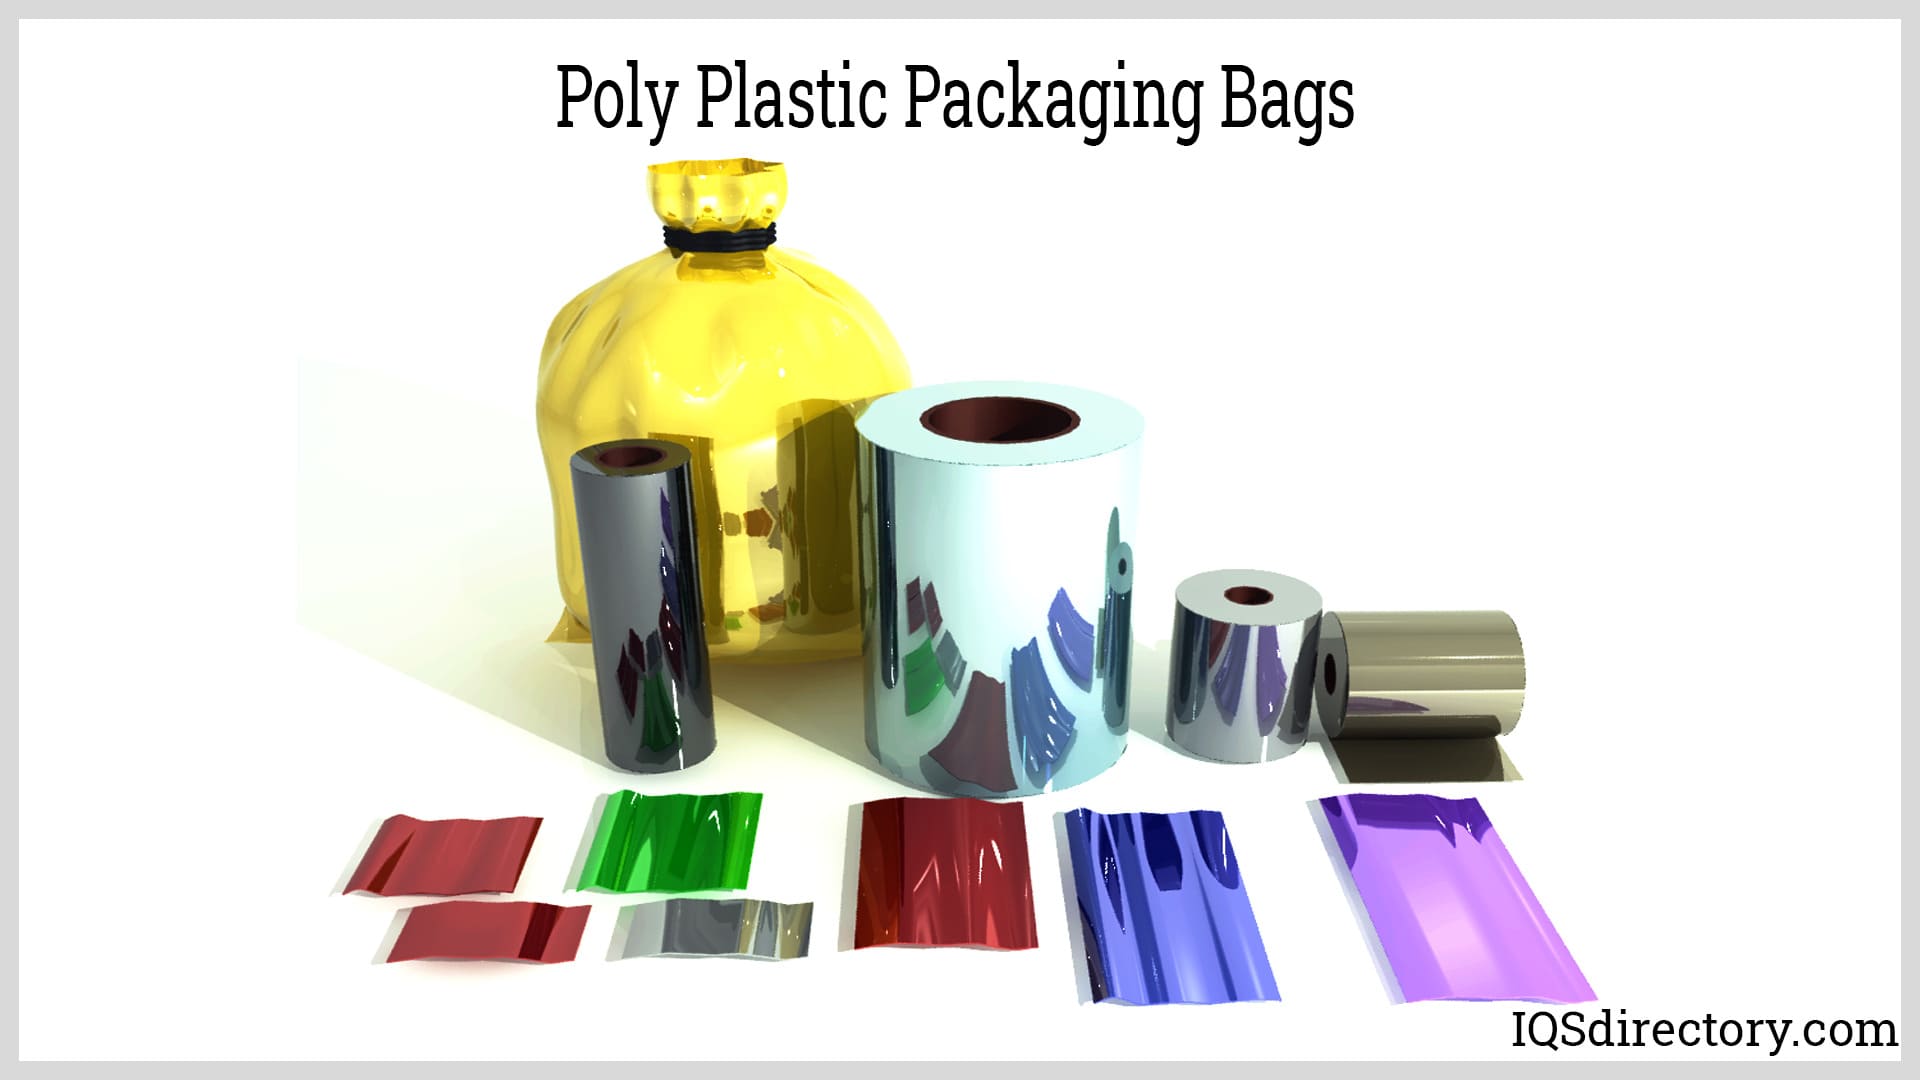 Poly Plastic Packaging Bags